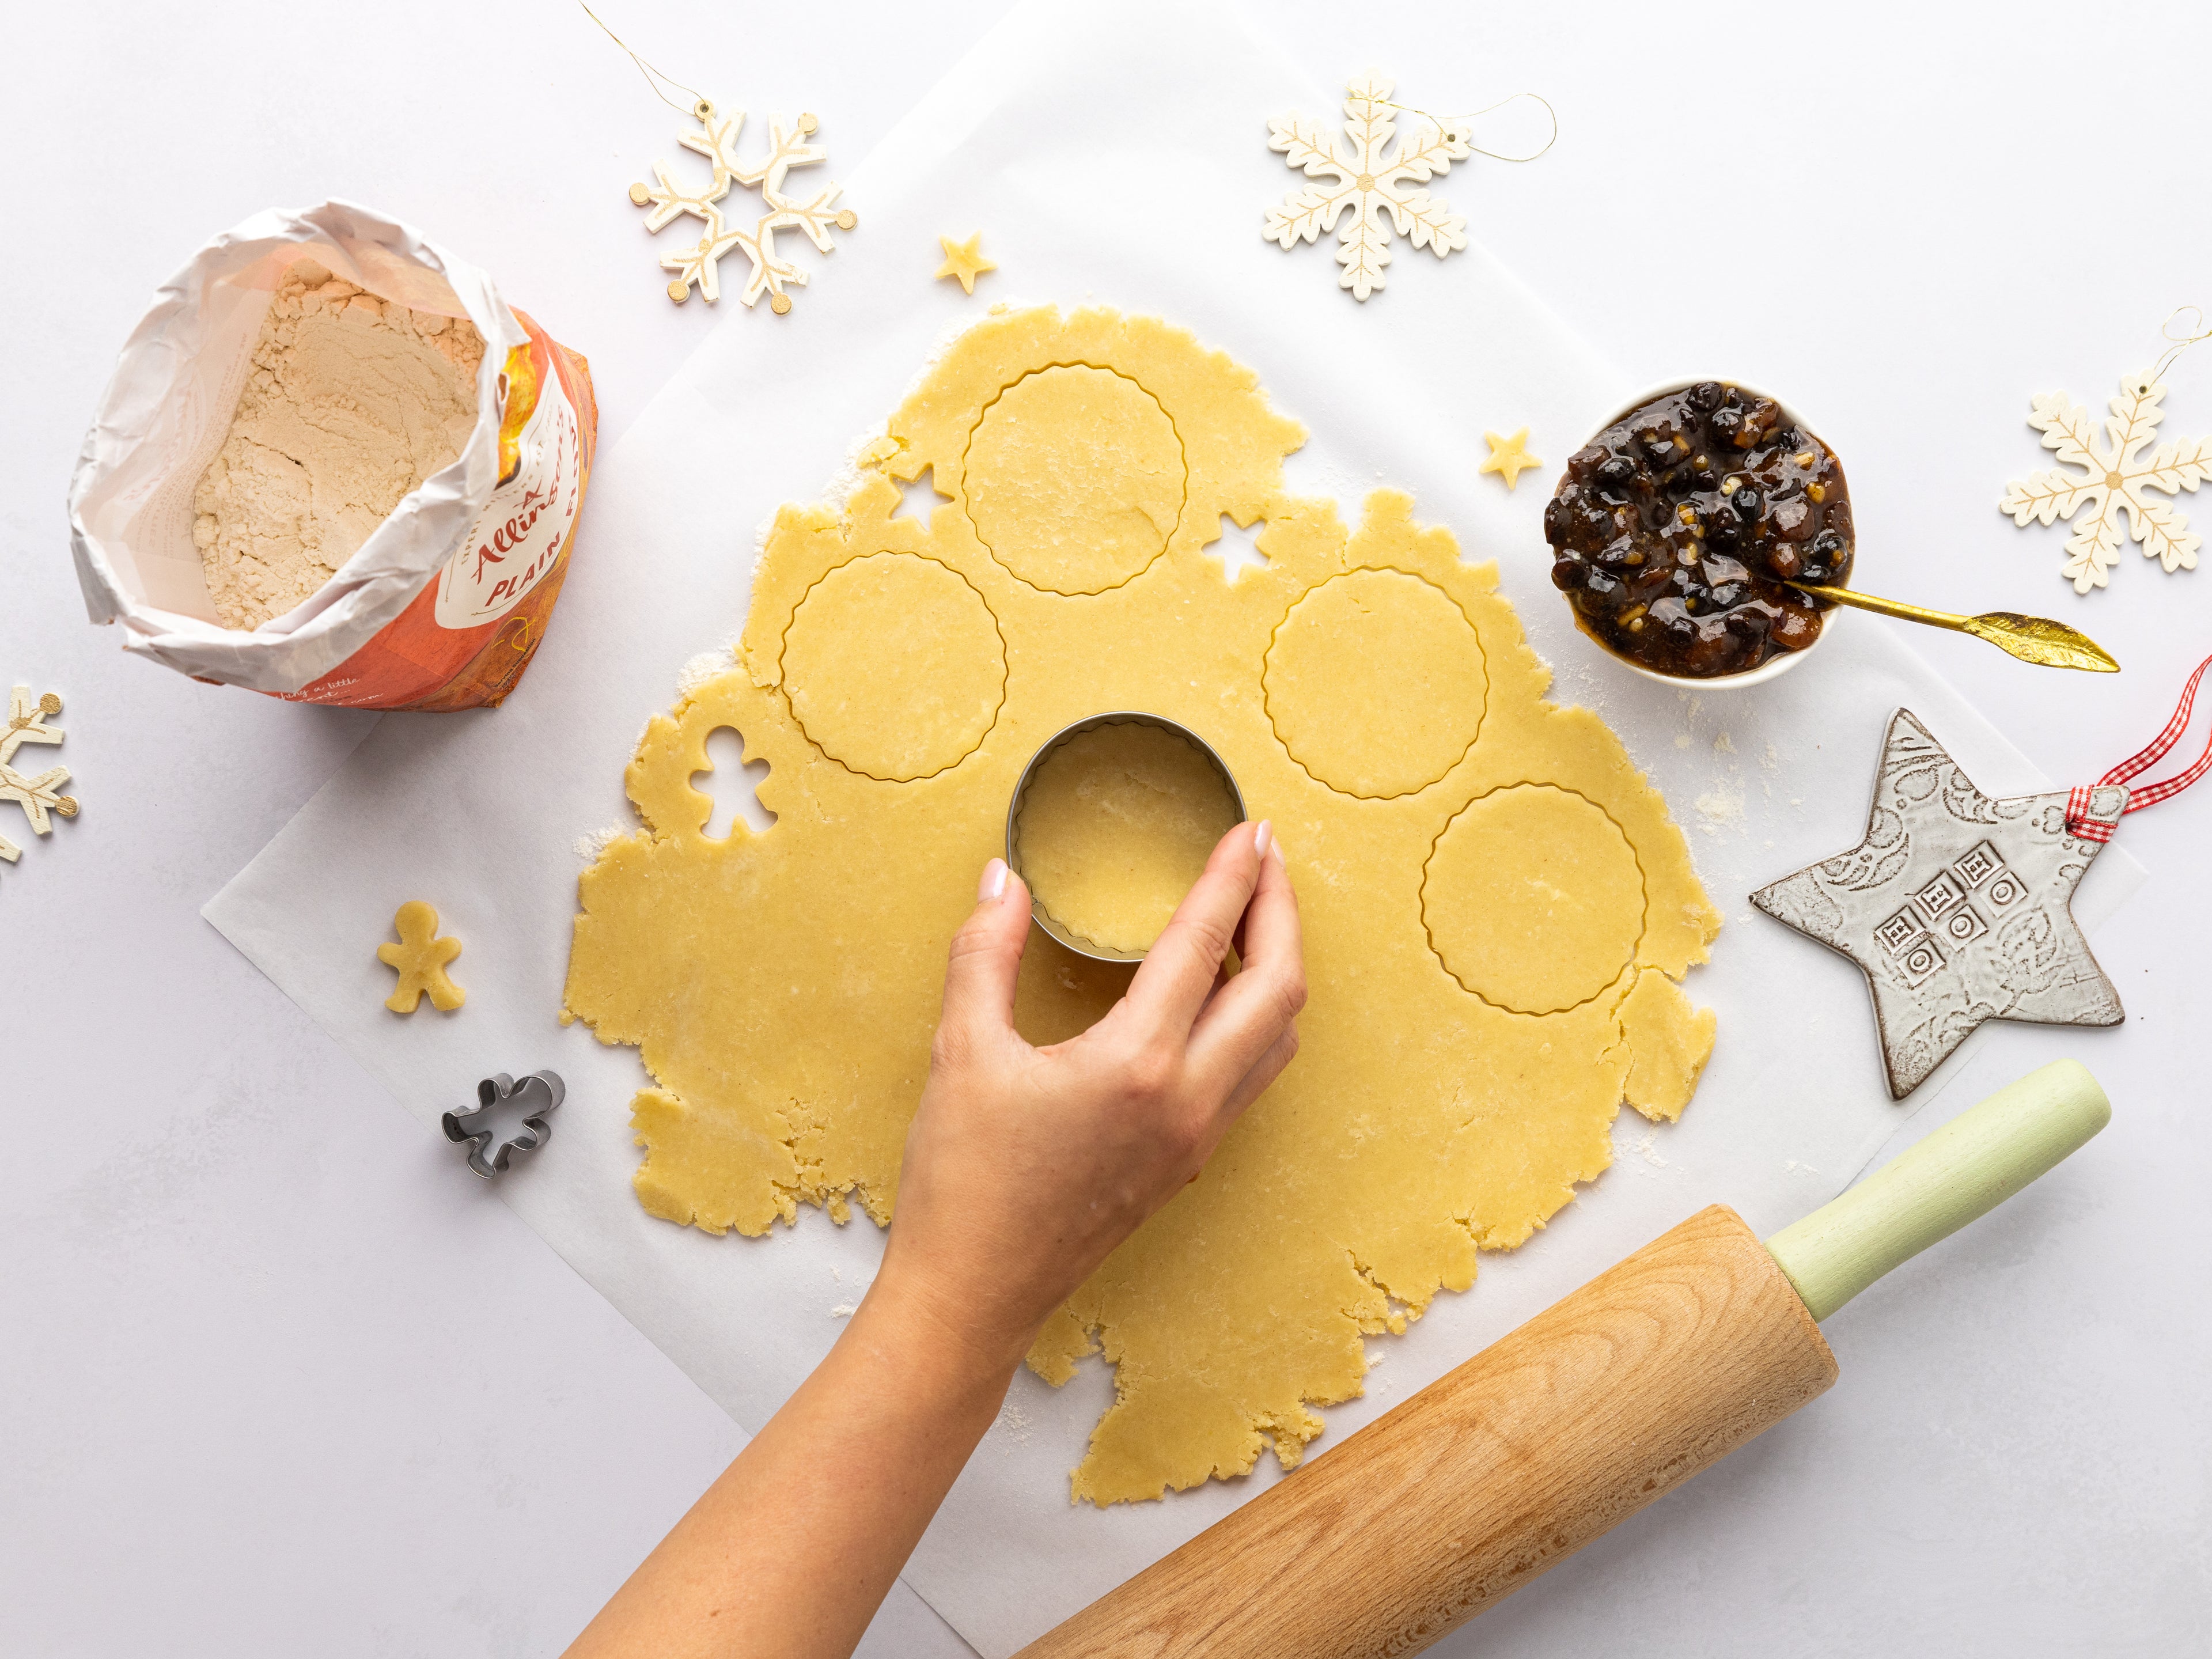 Hand cutting out circles from pastry with a cutter